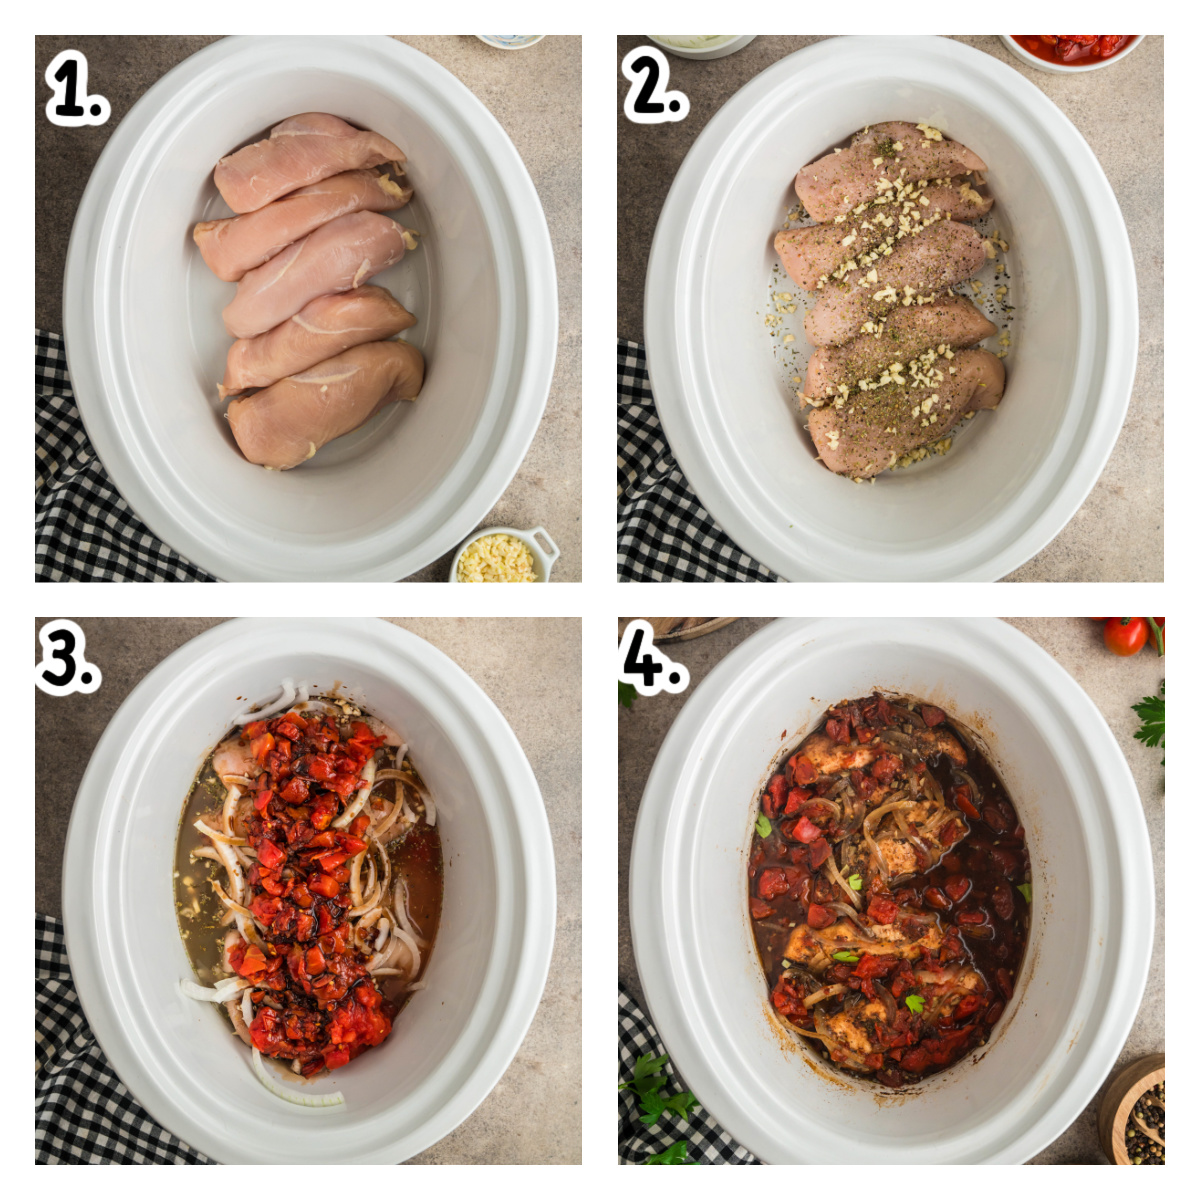 Four images showing how to make balsamic chicken in a crockpot.